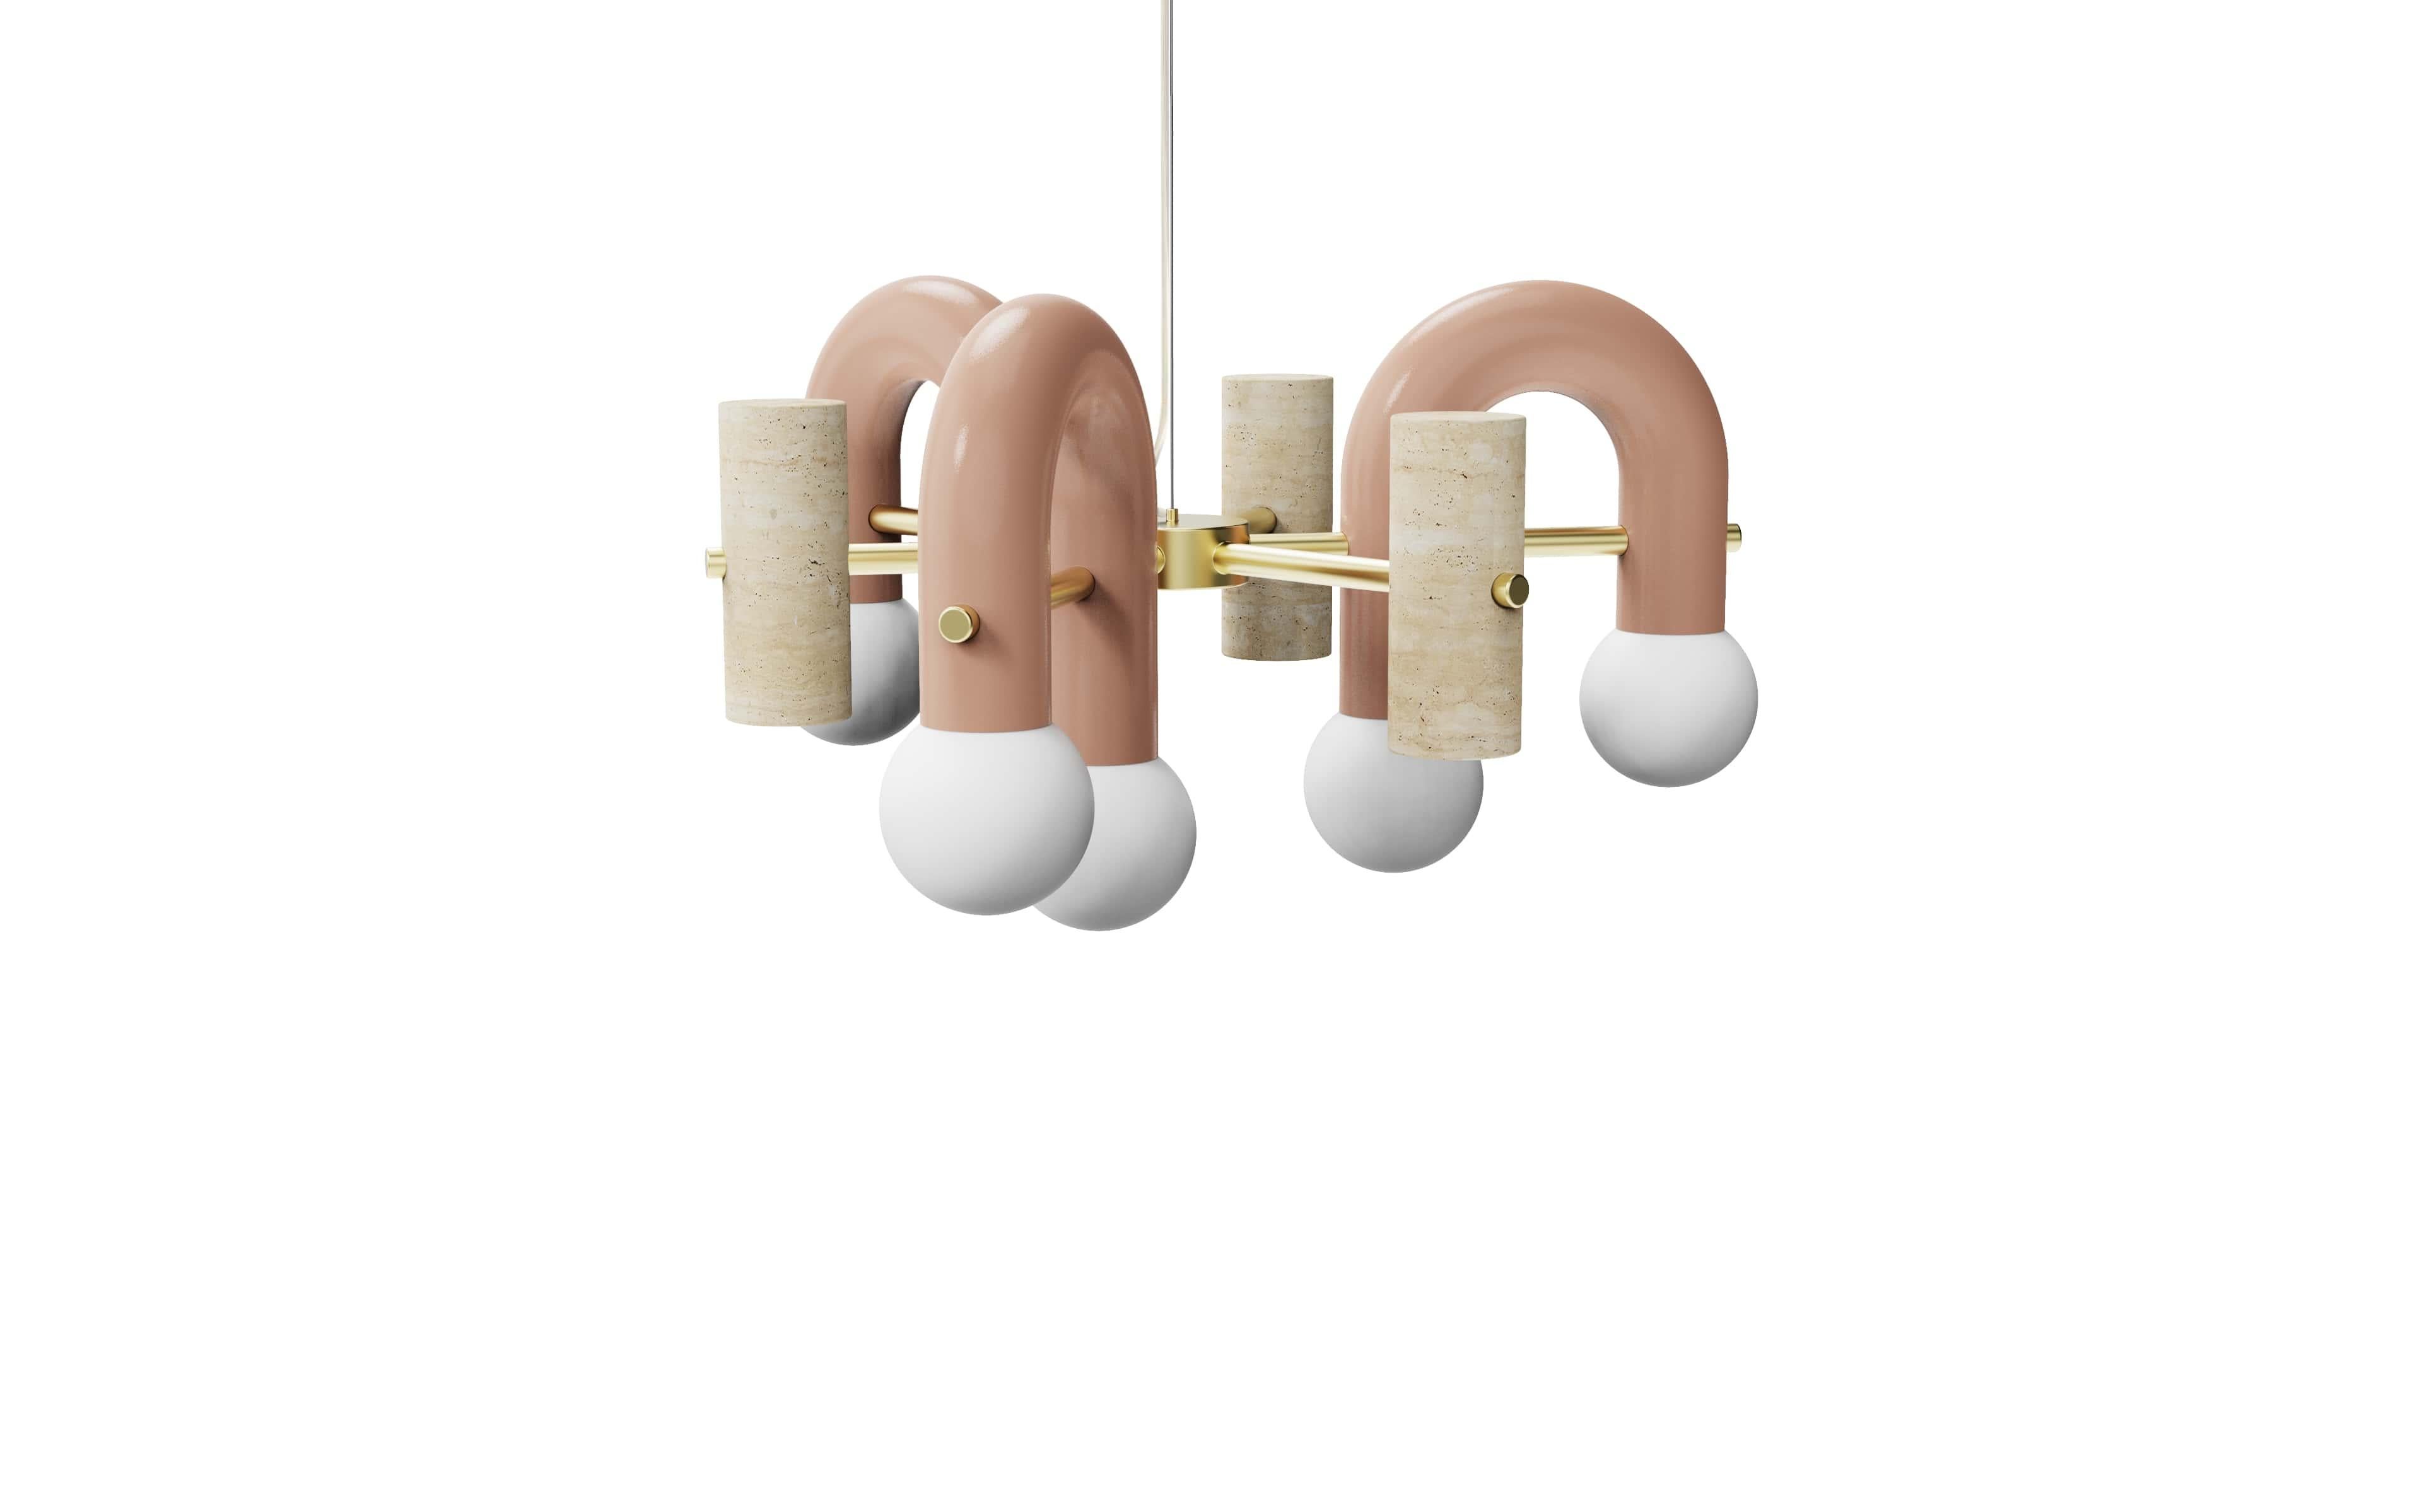 Pyppe Suspension Lamp 70 by Utu Lamps
Dimensions: 36 x 80 x 80 cm
Materials: Lacquered metal, brass, nickel/copper, travertine

All our lamps can be wired according to each country. If sold to the USA, it will be wired for the USA, for